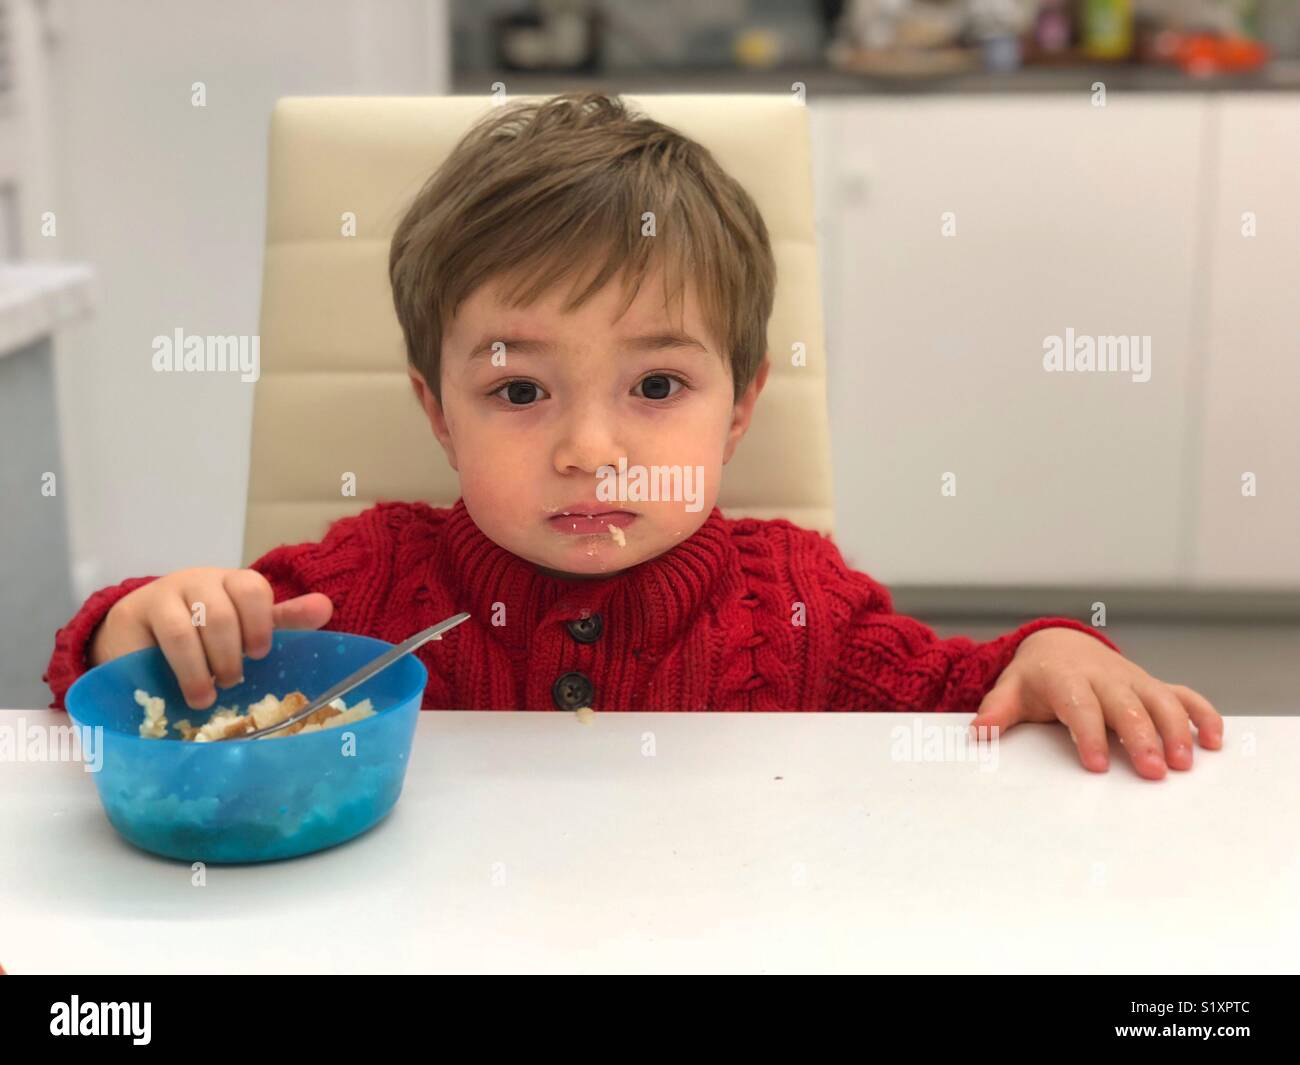 One year old baby eating by himself Stock Photo